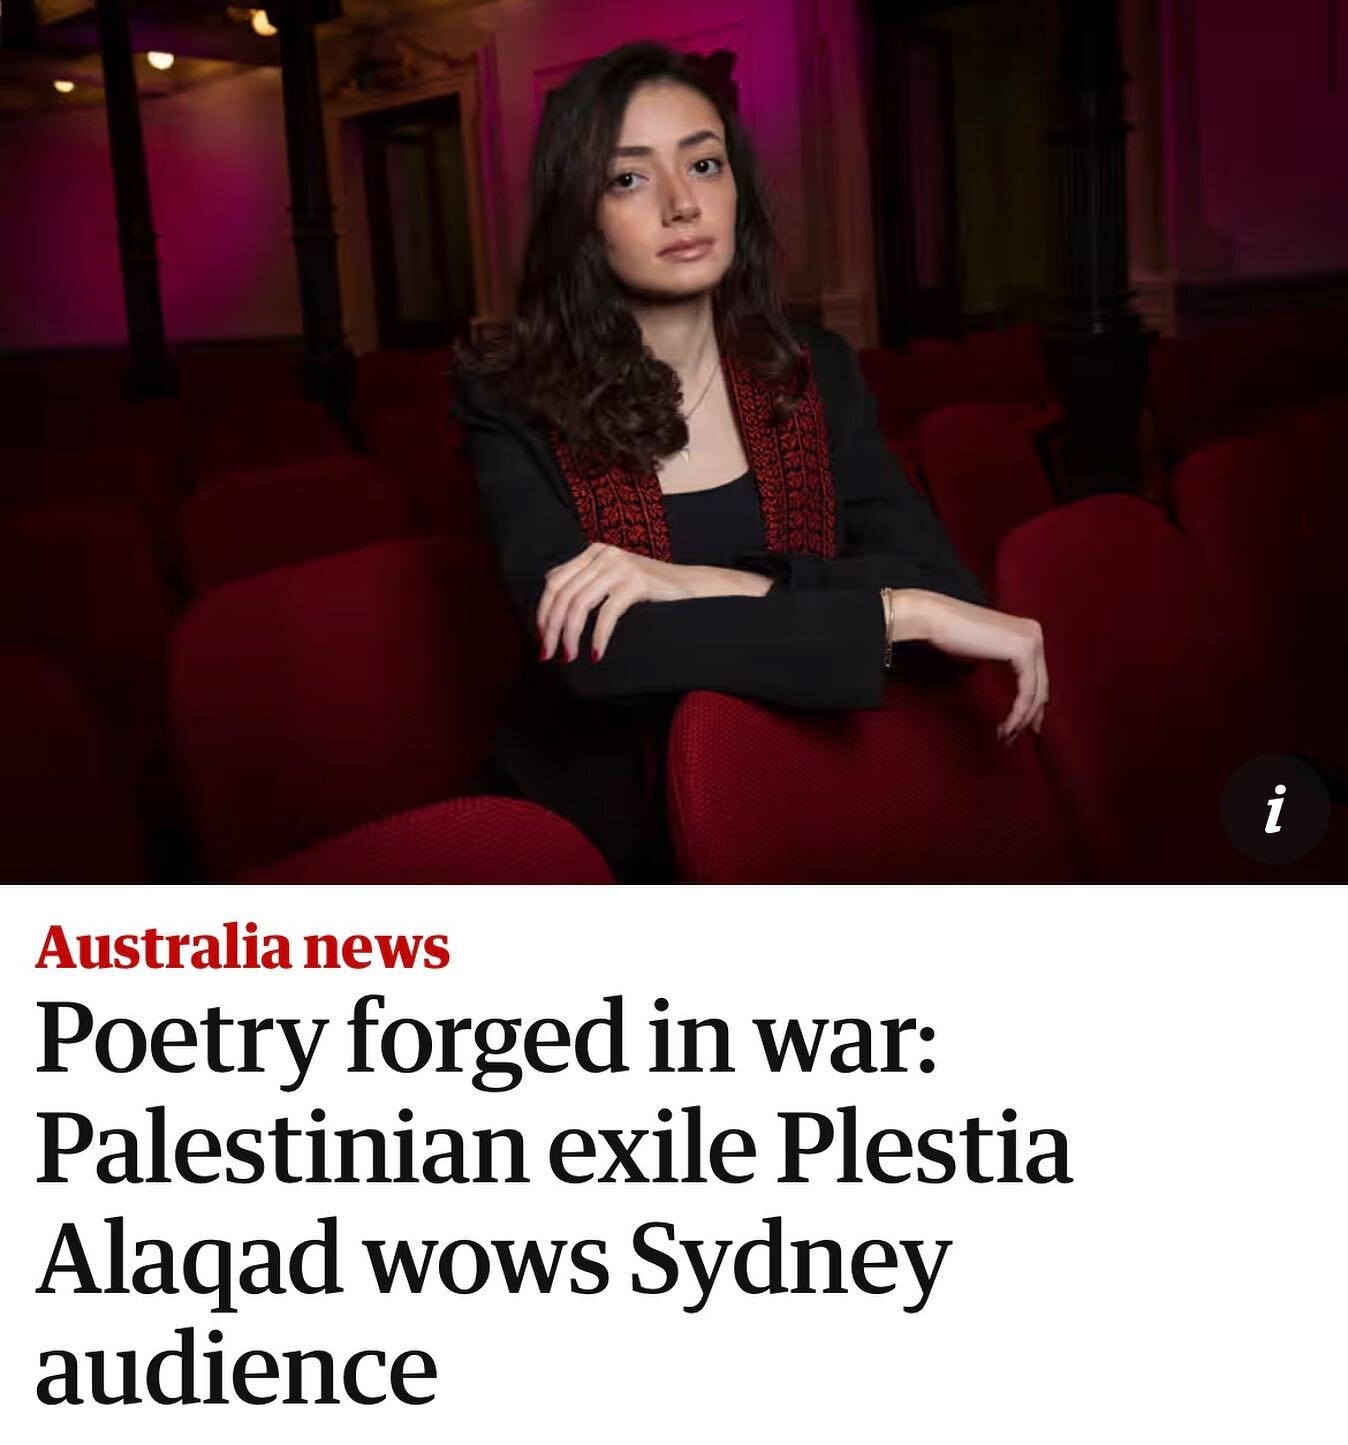 Thank you Daisy Dumas from @guardianaustralia for this great write up on last night&rsquo;s iconic sold out Grand Slam. 2000 people descended on Sydney Town Hall for poetry and @byplestia ❤️&zwj;🔥

A huge congrats to our winning team, Halal Collab!
